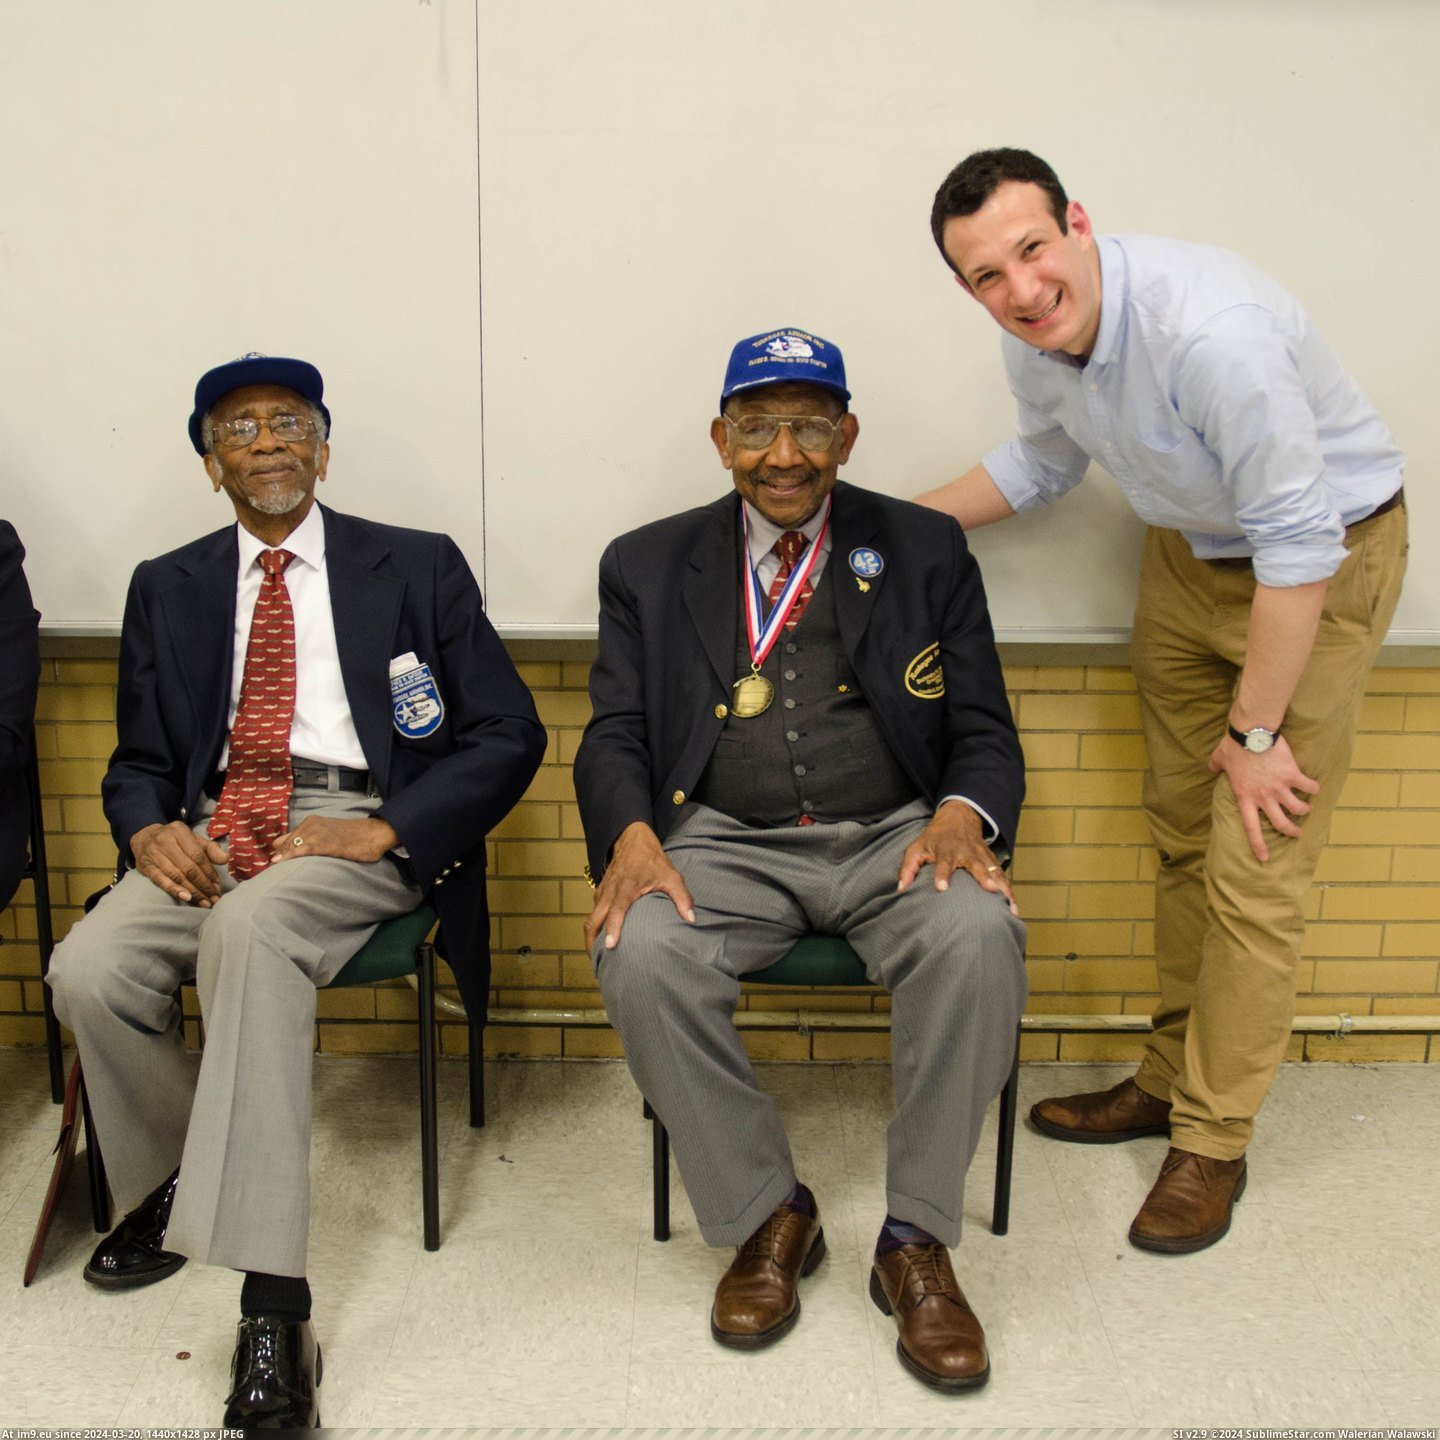 #Was #Teacher #American #Airmen #Tuskegee #History #Classes #Speak [Pics] I'm an American history teacher and was able to get 2 Tuskegee Airmen to come speak to my classes today Pic. (Изображение из альбом My r/PICS favs))